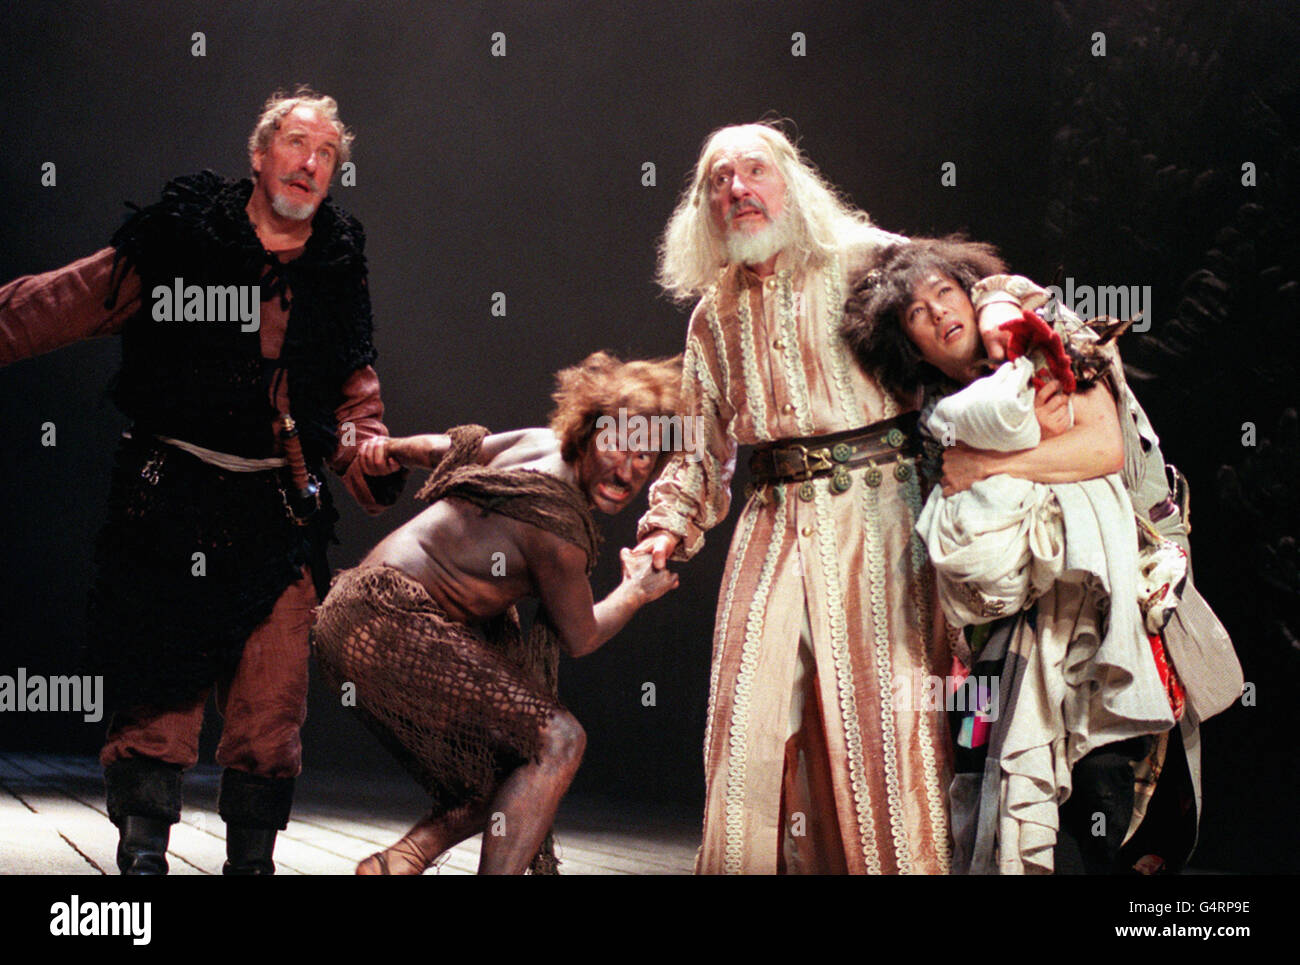 Nigel Hawthorne in the role of King Lear during rehearsals at the London Barbican Theatre and performed by members of the Royal Shakespeare Company. Stock Photo